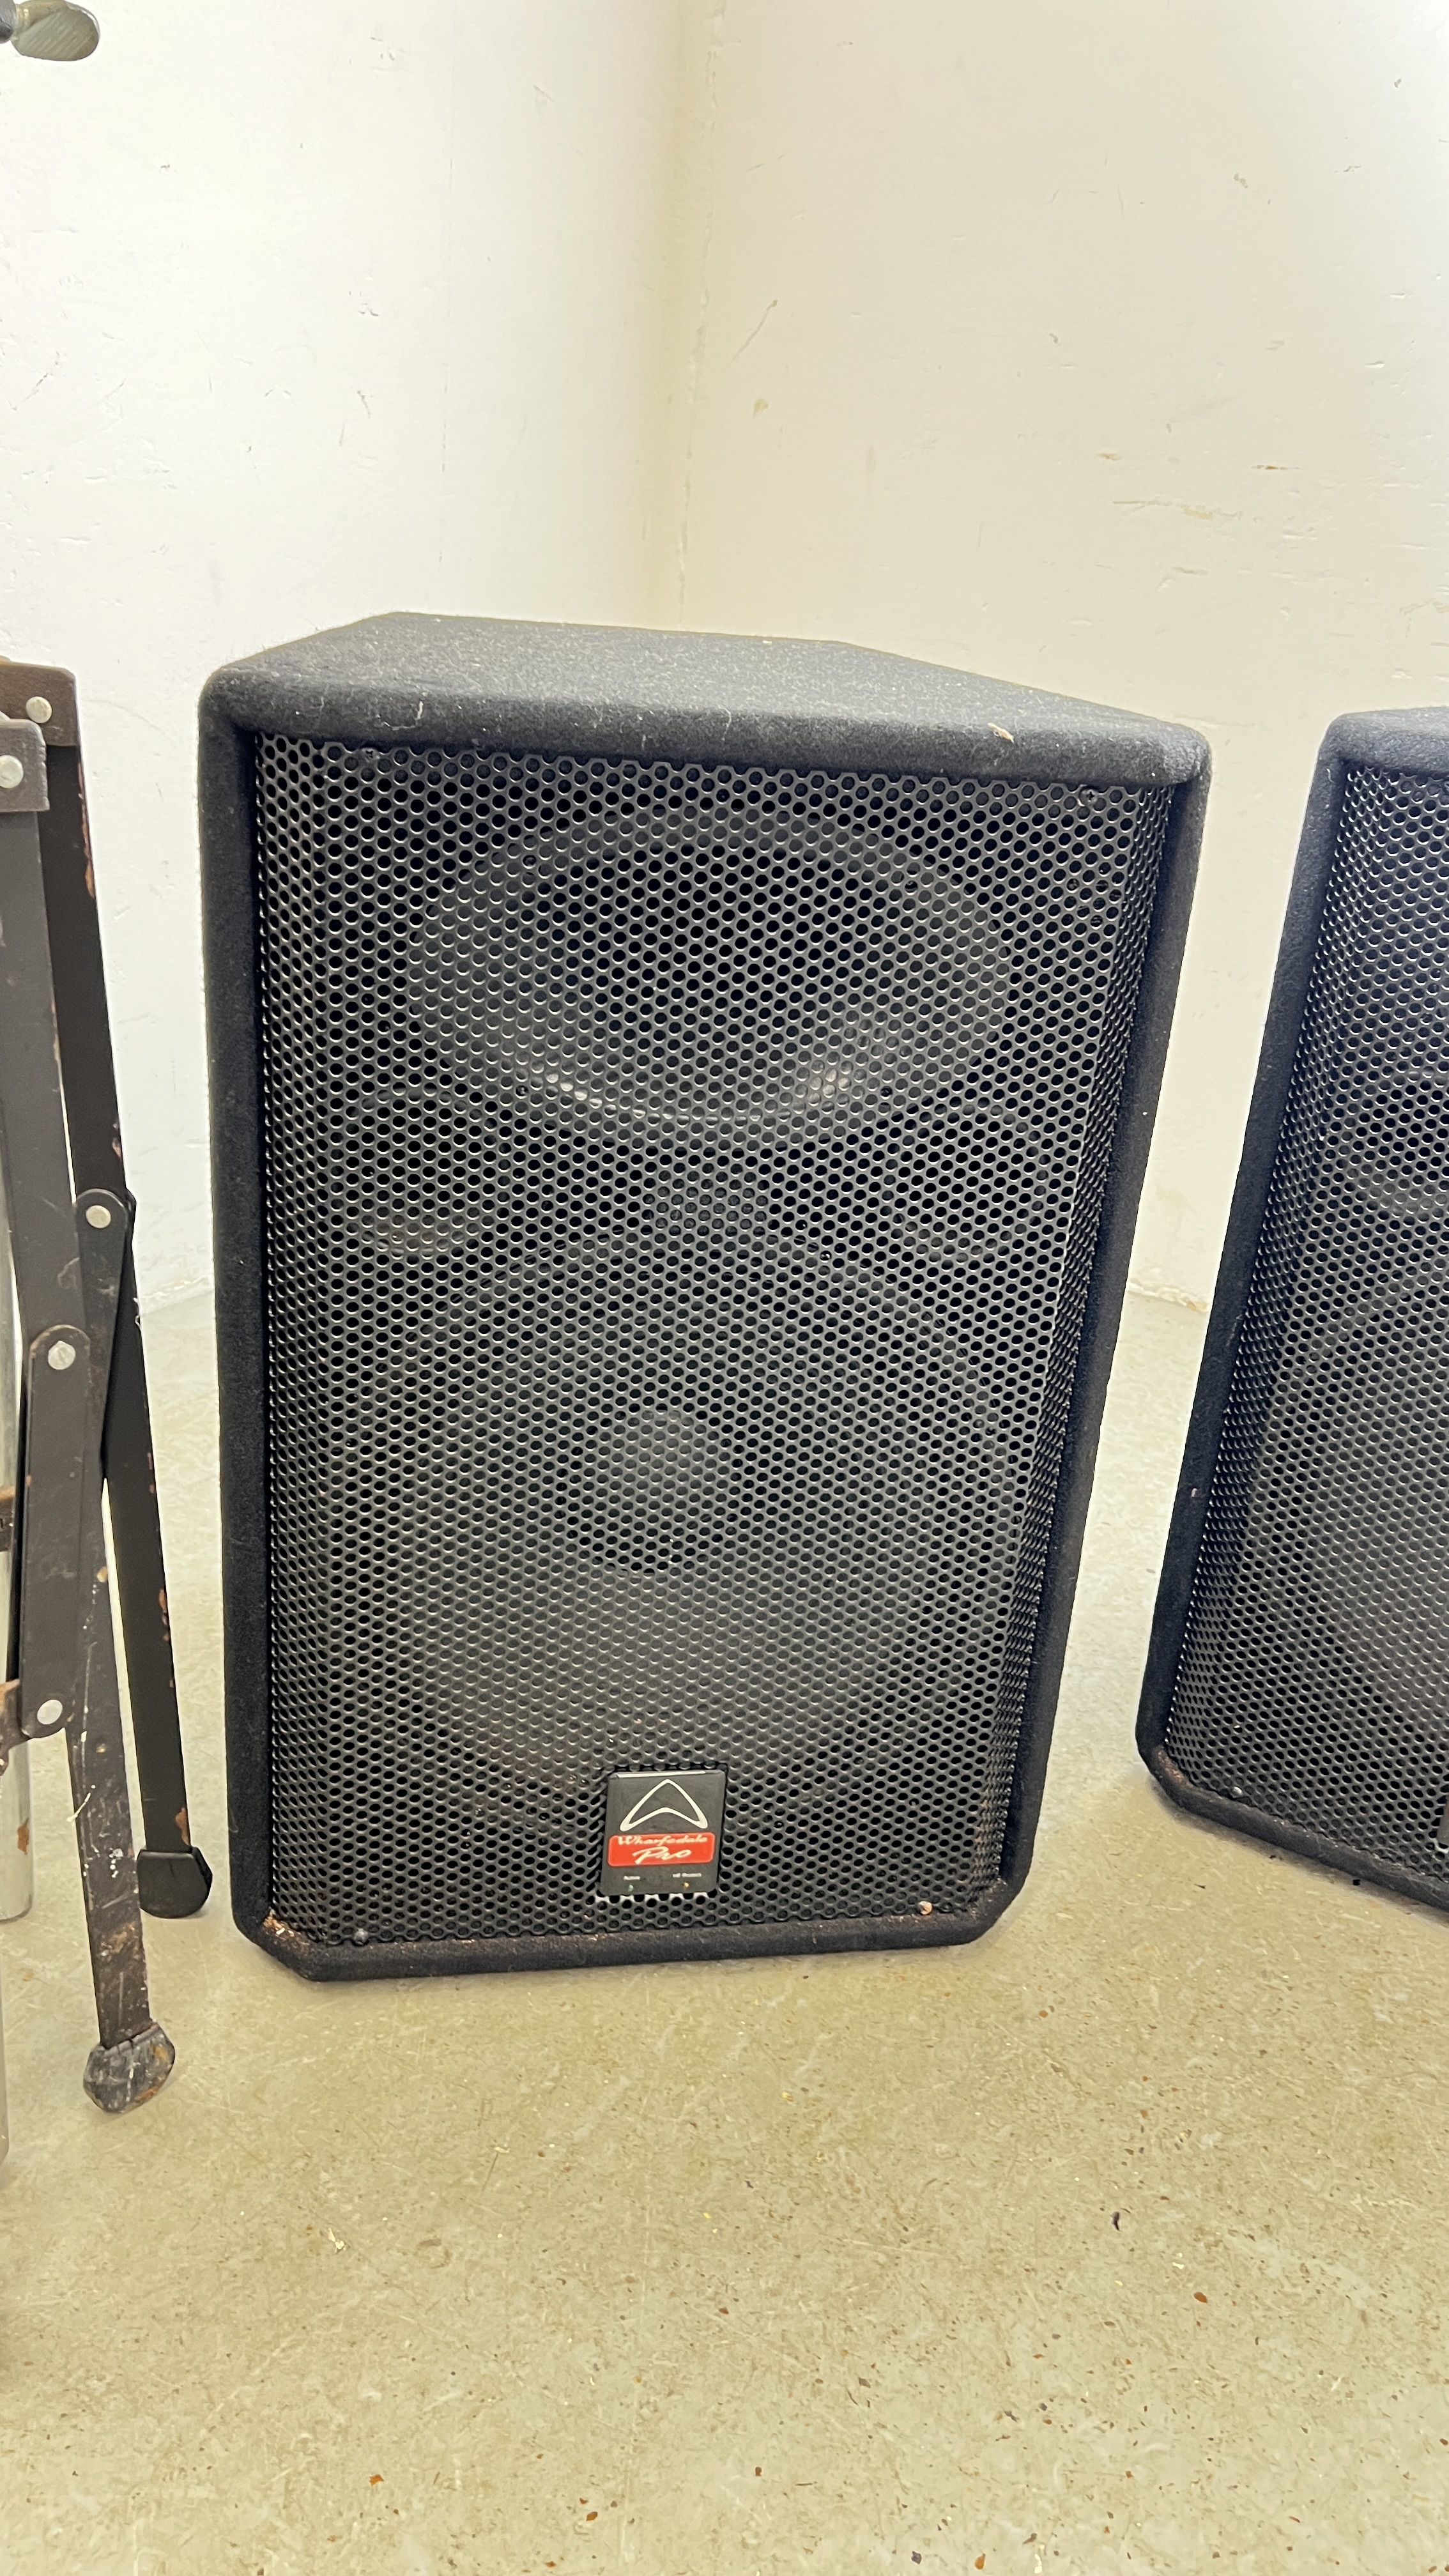 PAIR OF WHARFDALE PRO EVP-X15PA LOUD SPEAKERS PLUS PAIR OF FOLDING TRIPOD STANDS - SOLD AS SEEN - - Image 4 of 6